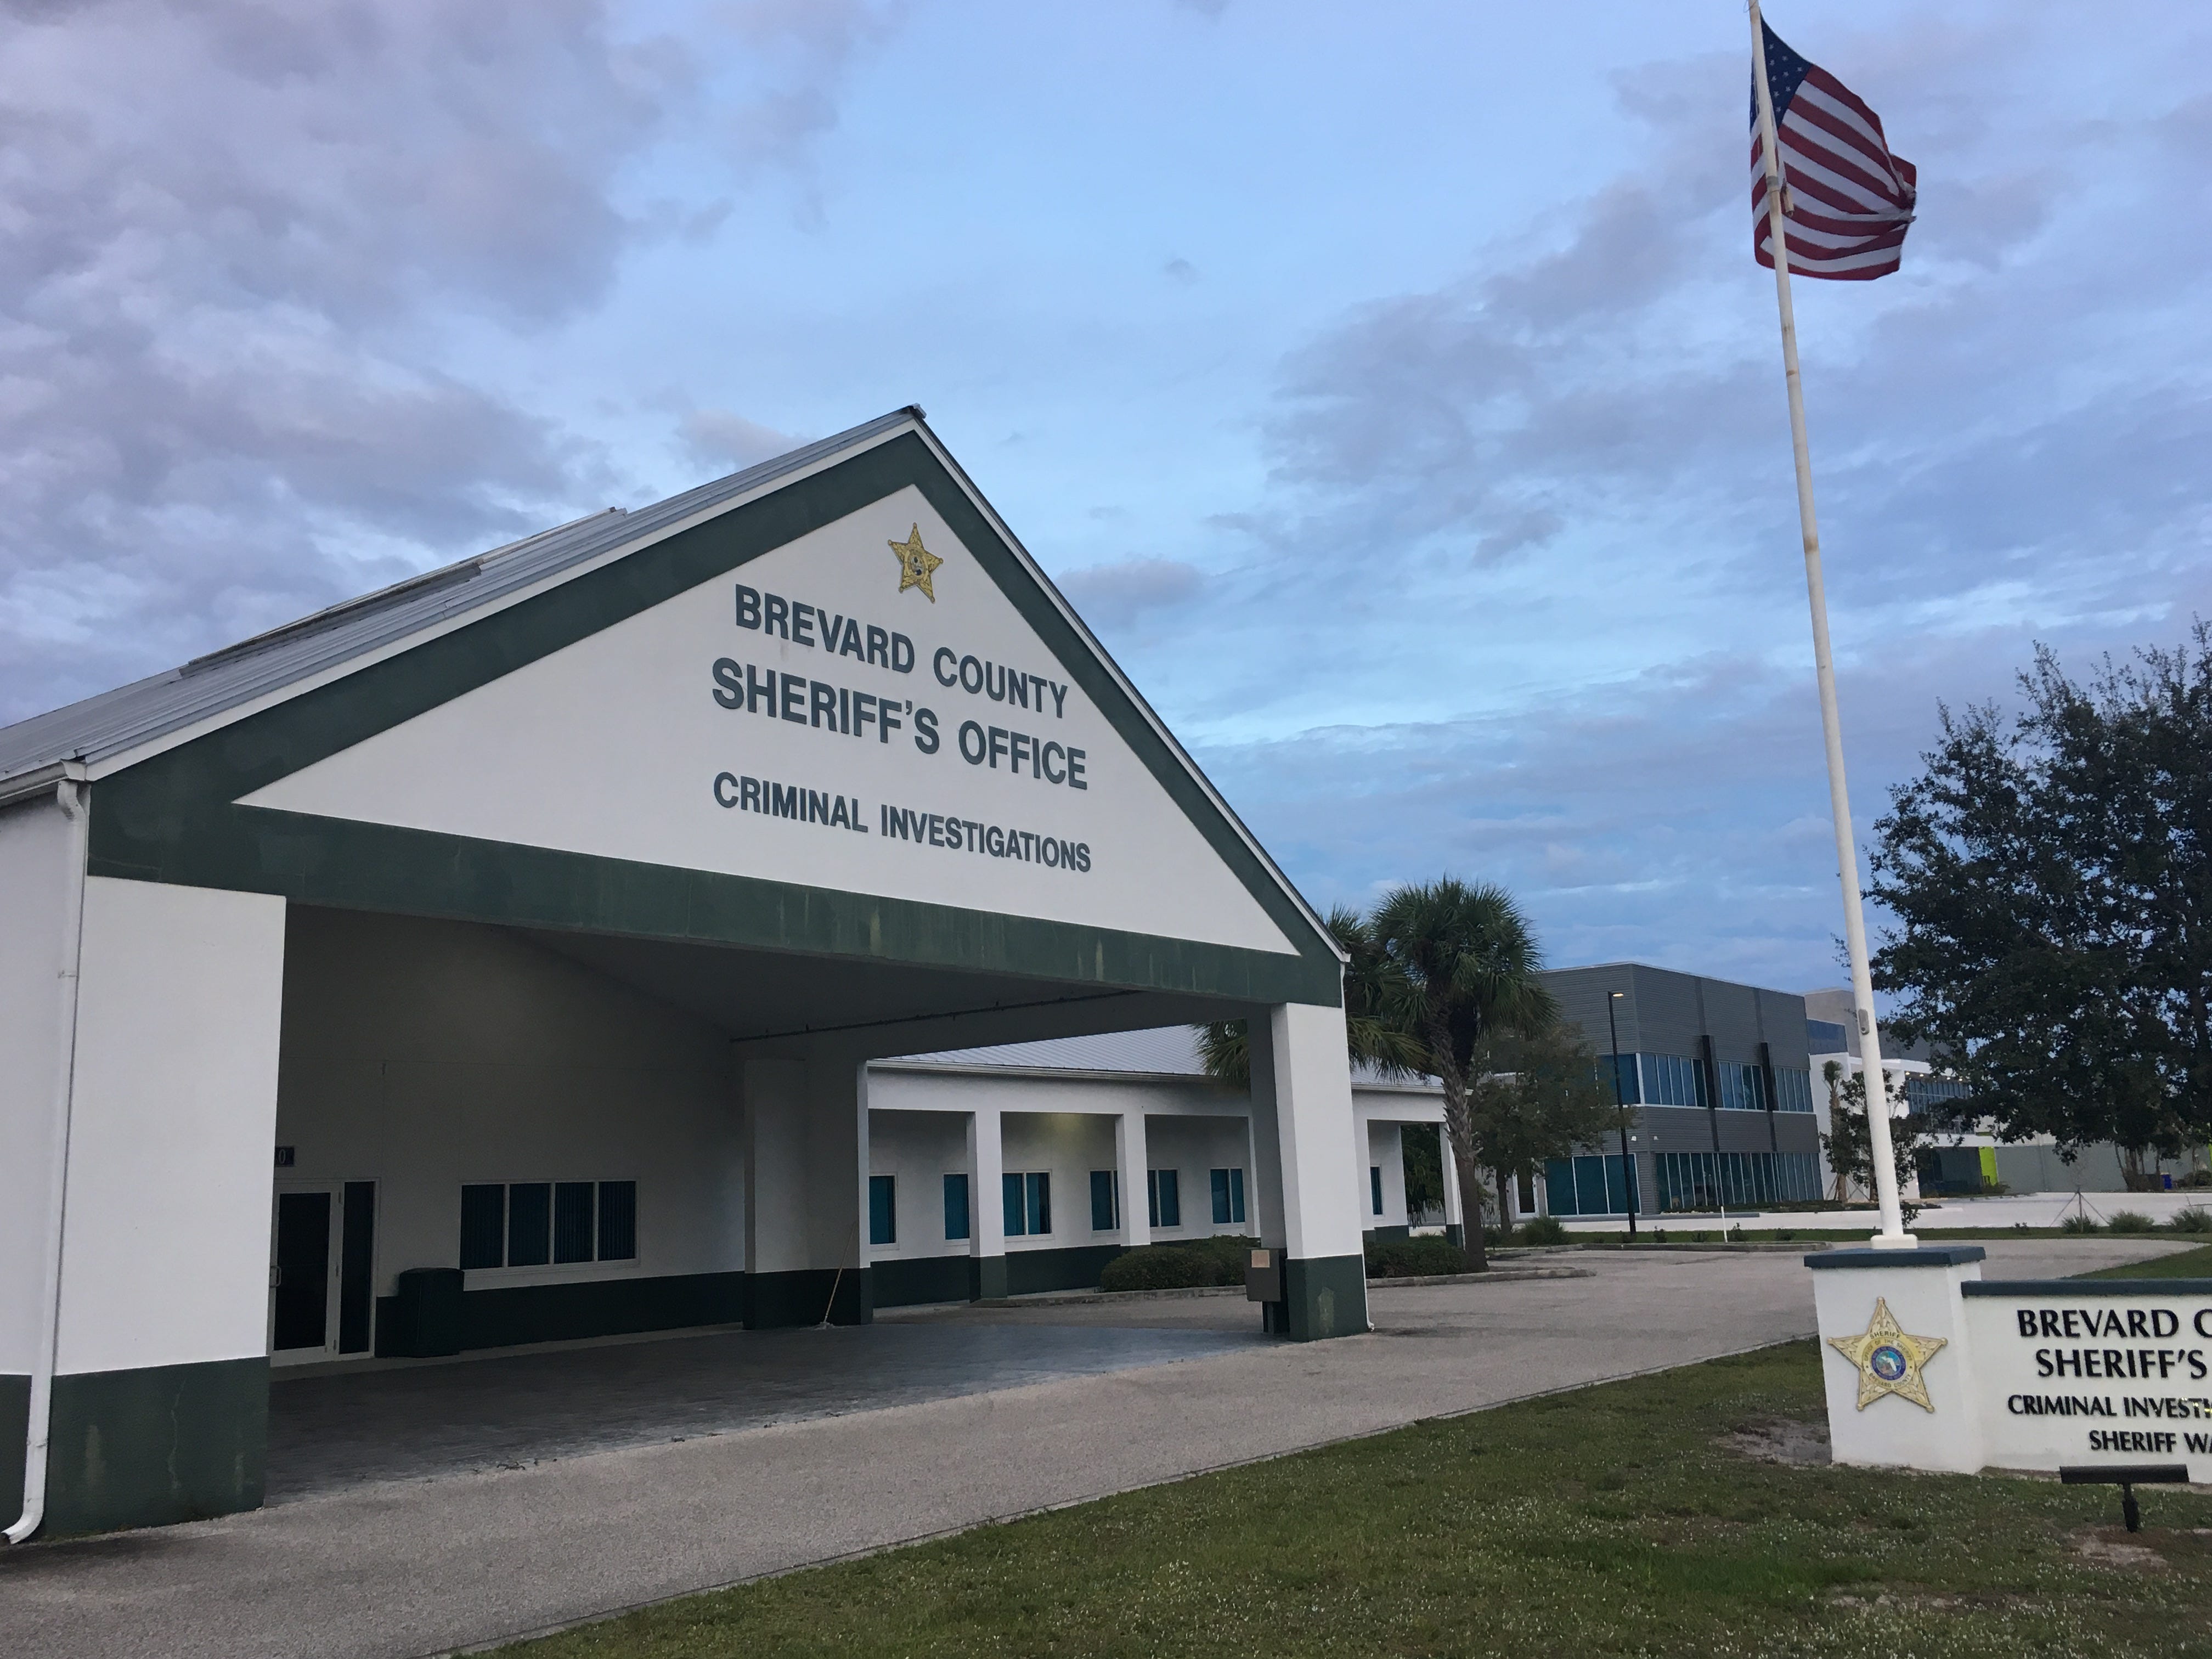 Image of Brevard County Sheriff's Office